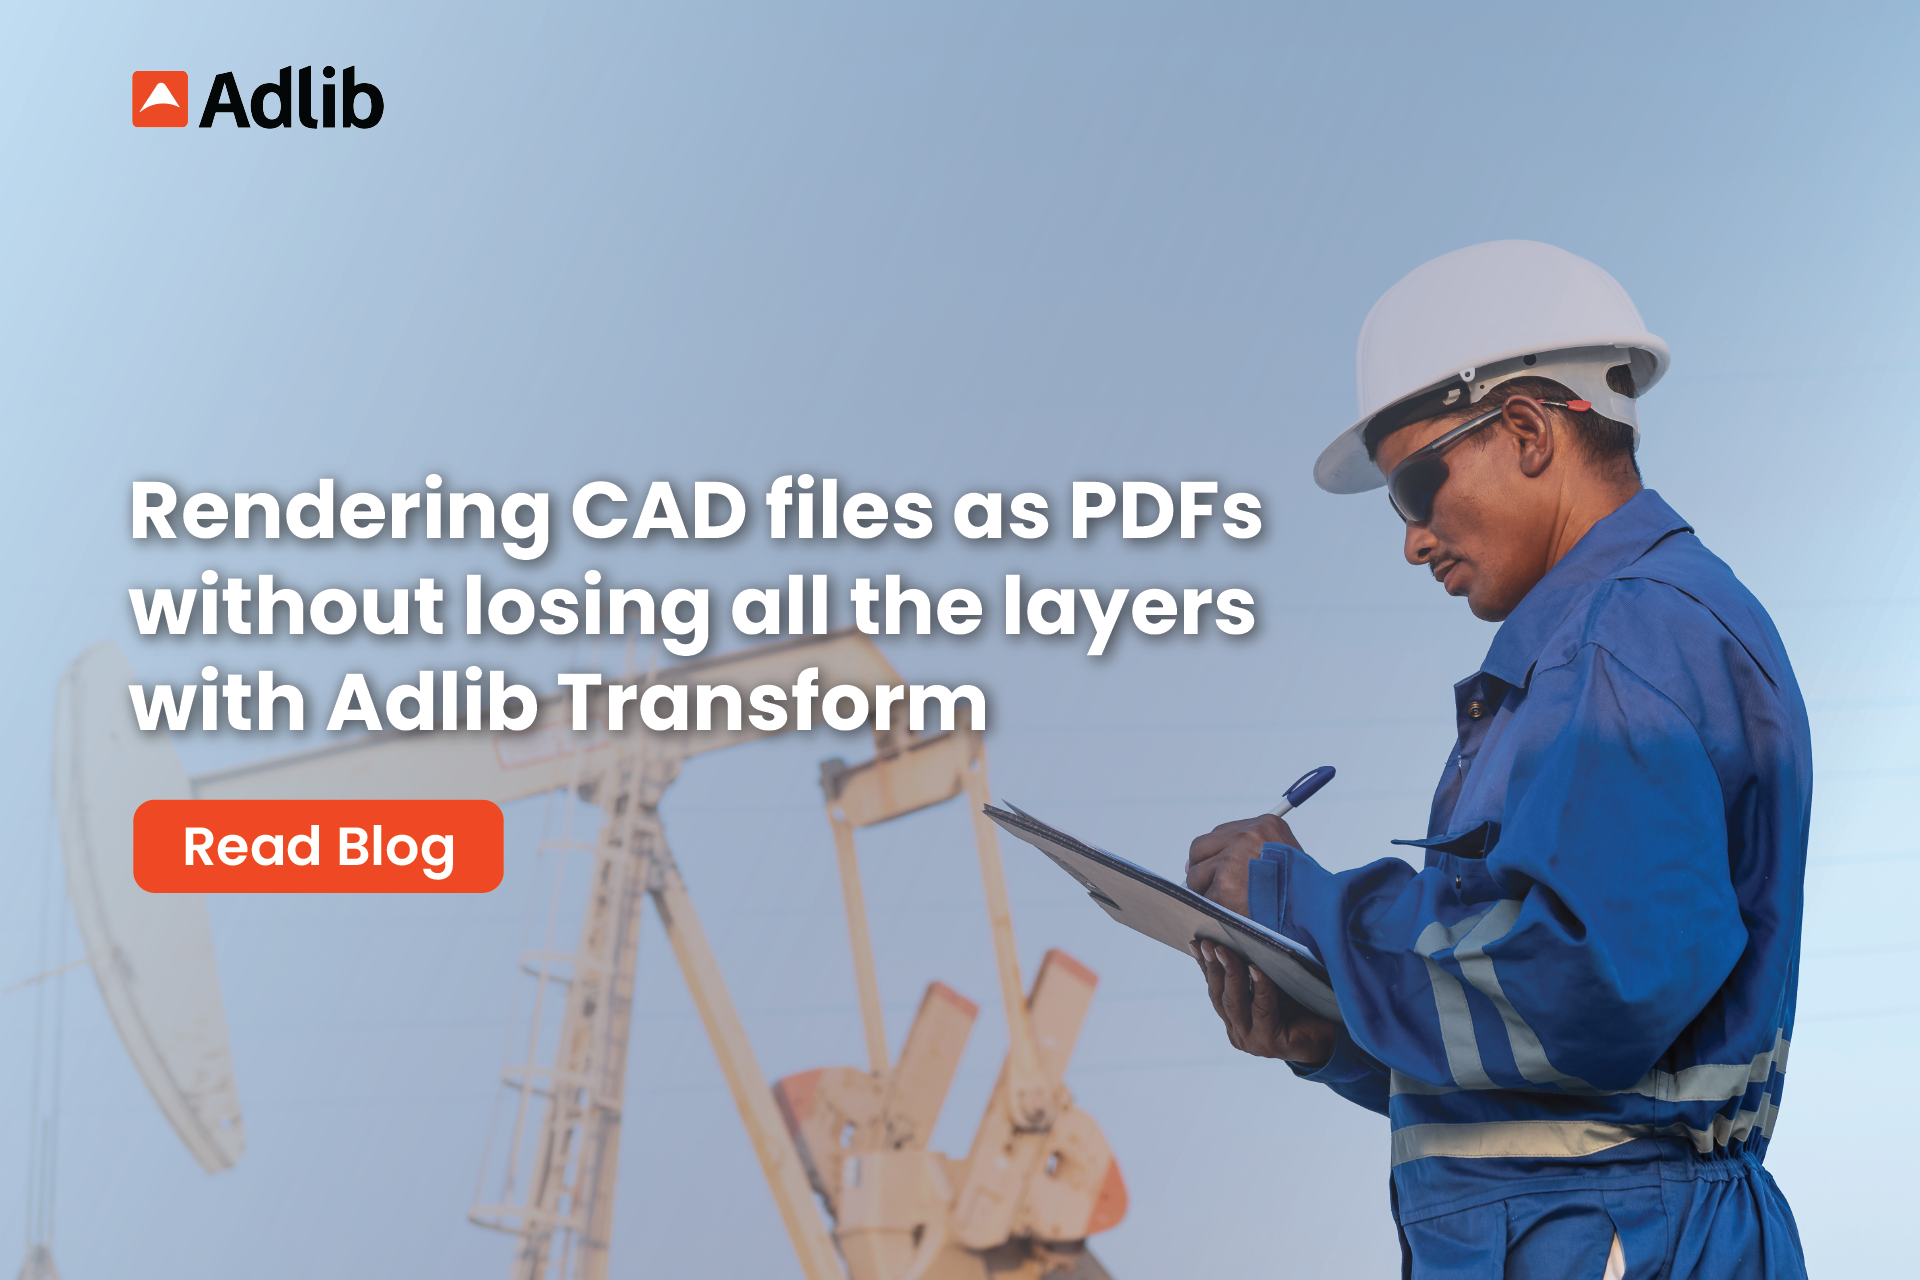 Rendering CAD files as PDFs without losing layers with Adlib Transform Featured Image